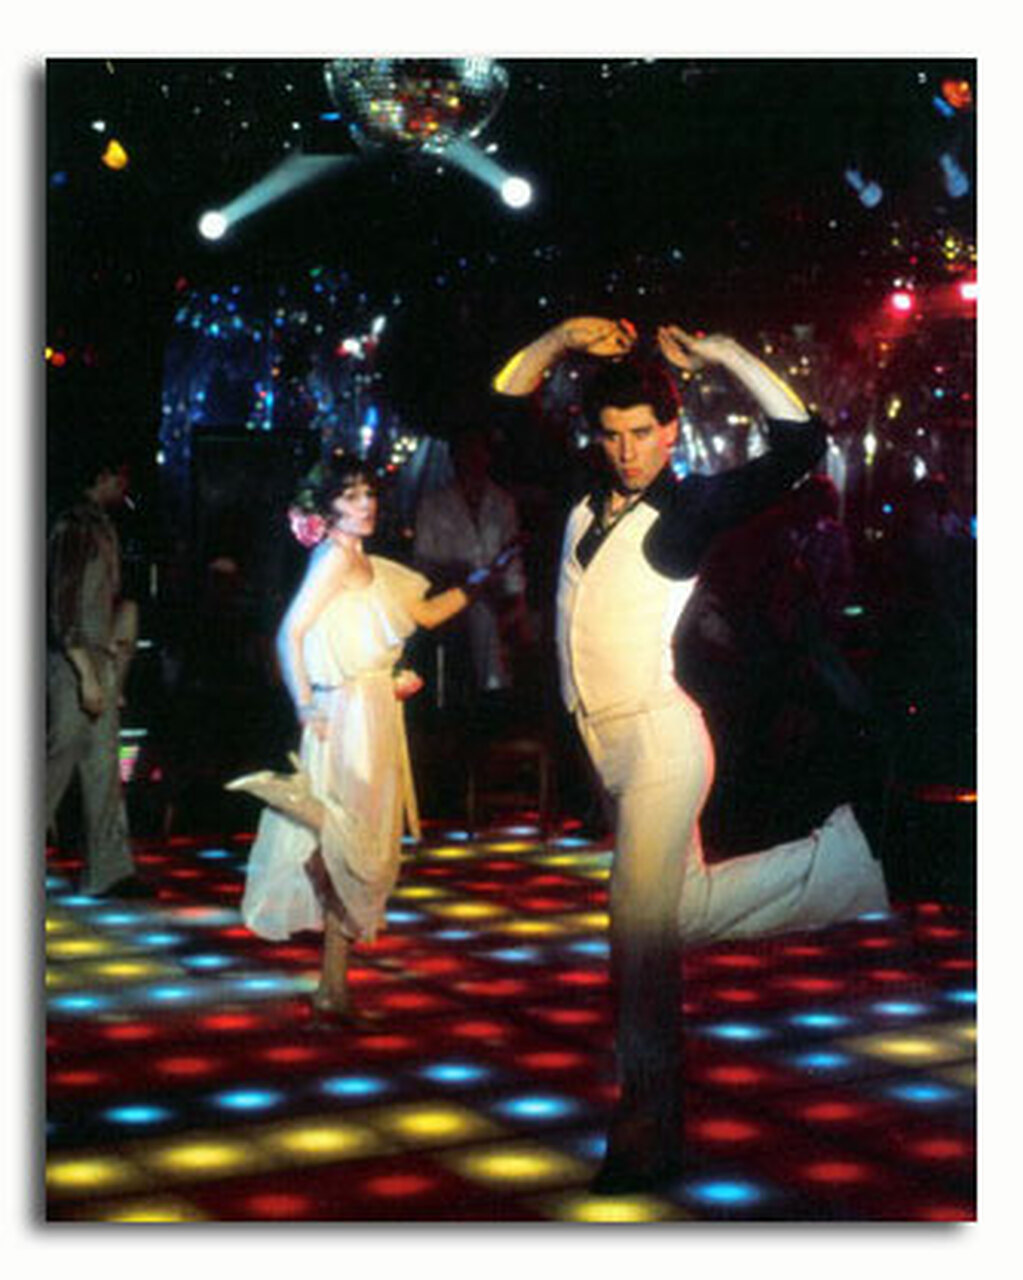 SS3447054) Movie picture of Saturday Night Fever buy celebrity photo and posters at Starstills.com